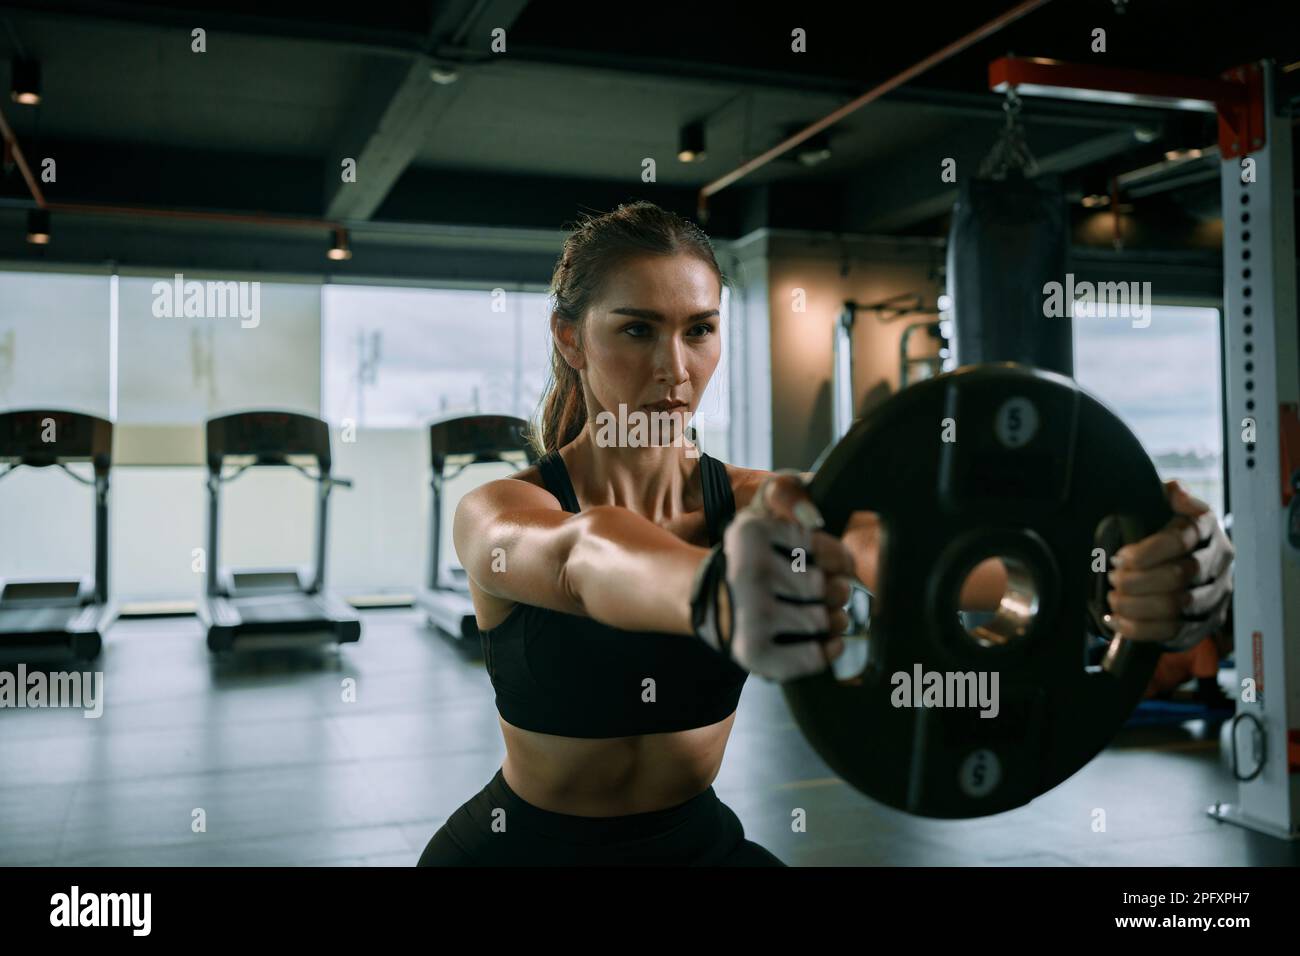 Sporty woman exercising with weight plate in the gym. Stock Photo